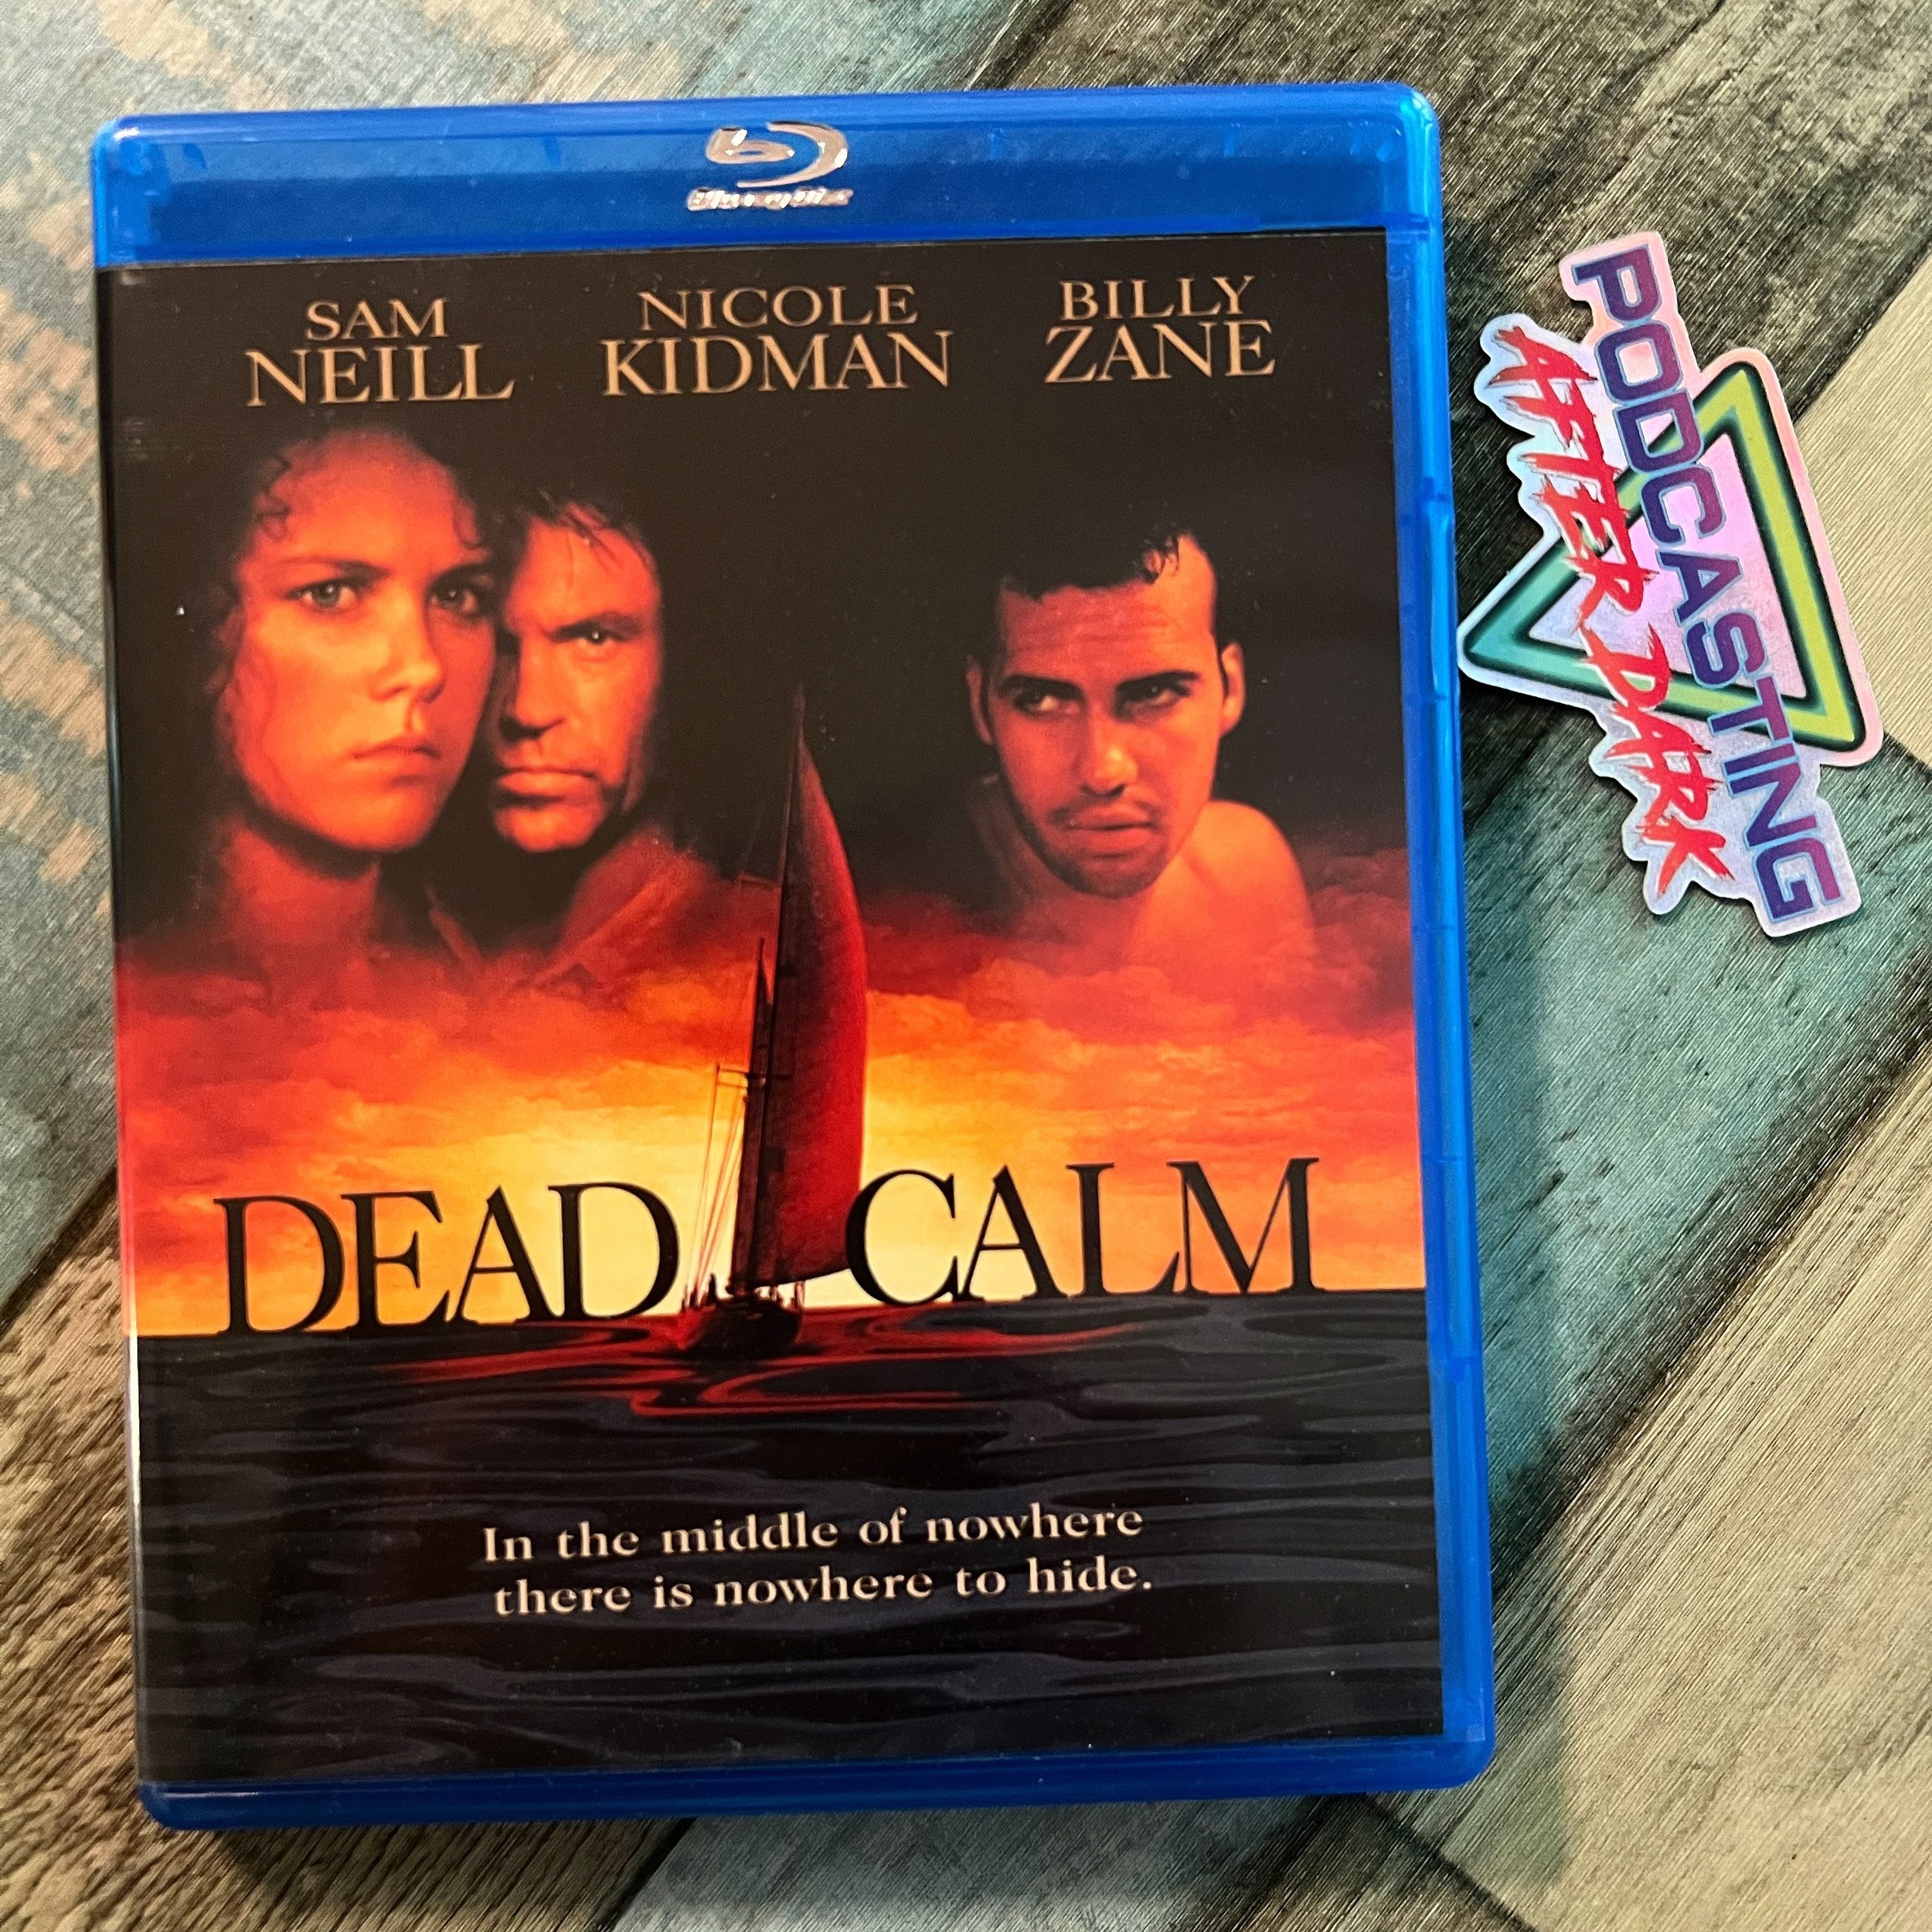 We&rsquo;re recording our review of DEAD CALM (1989) starring starring Sam Neill, Nicole Kidman, and Billy Zane tonight! Thanks to Cam of the @jacked_up_podcast for picking this via Patreon. The episode will drop next week on all major pod-apps!
&mda